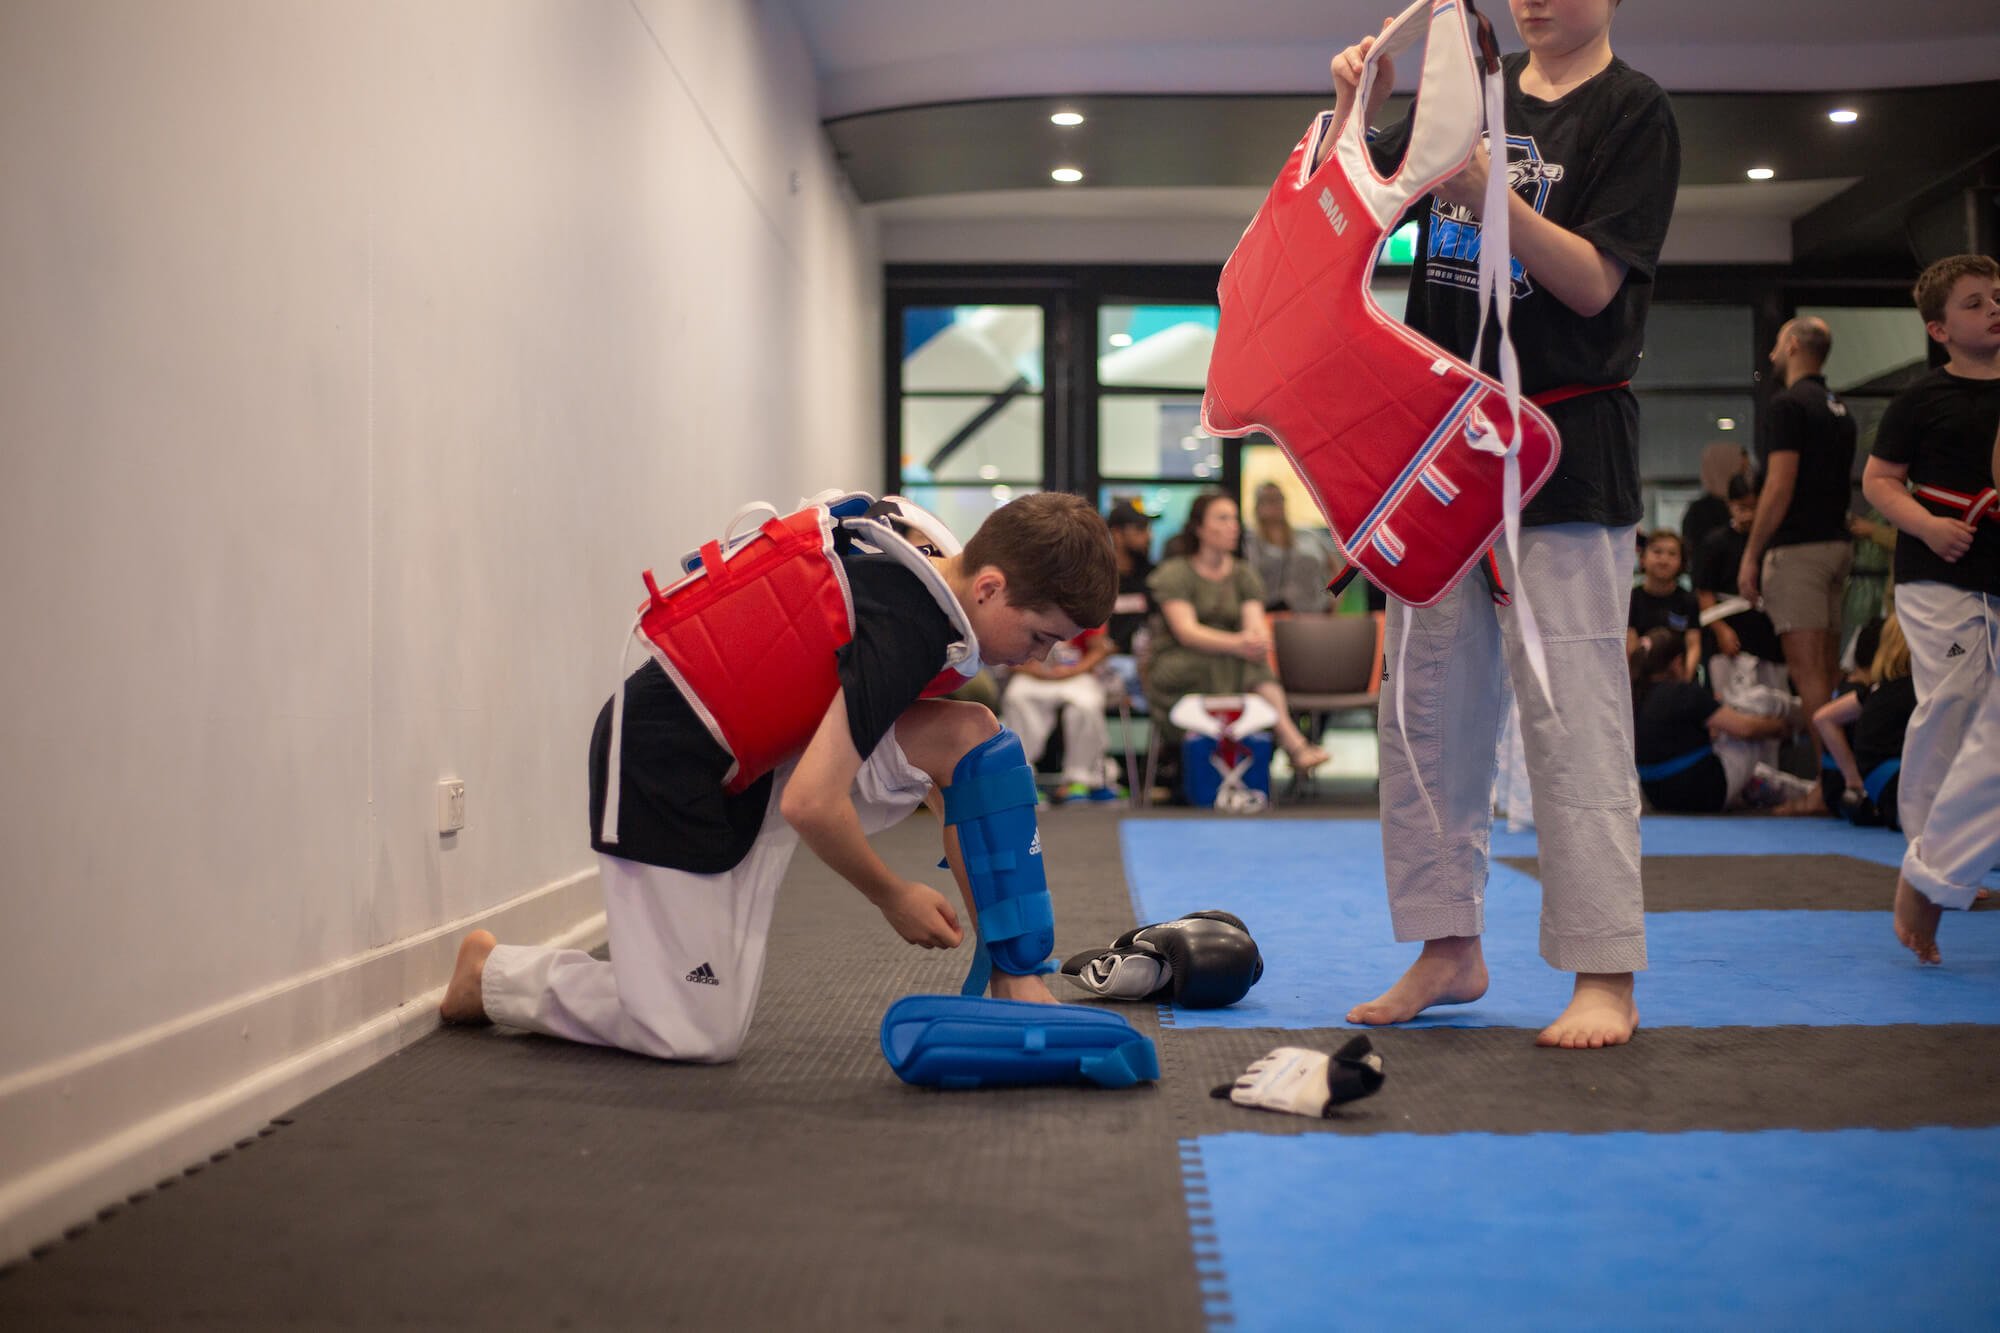 Boys Gearing up for Martial Arts _ Westgate Sports & Leisure Centre.jpg